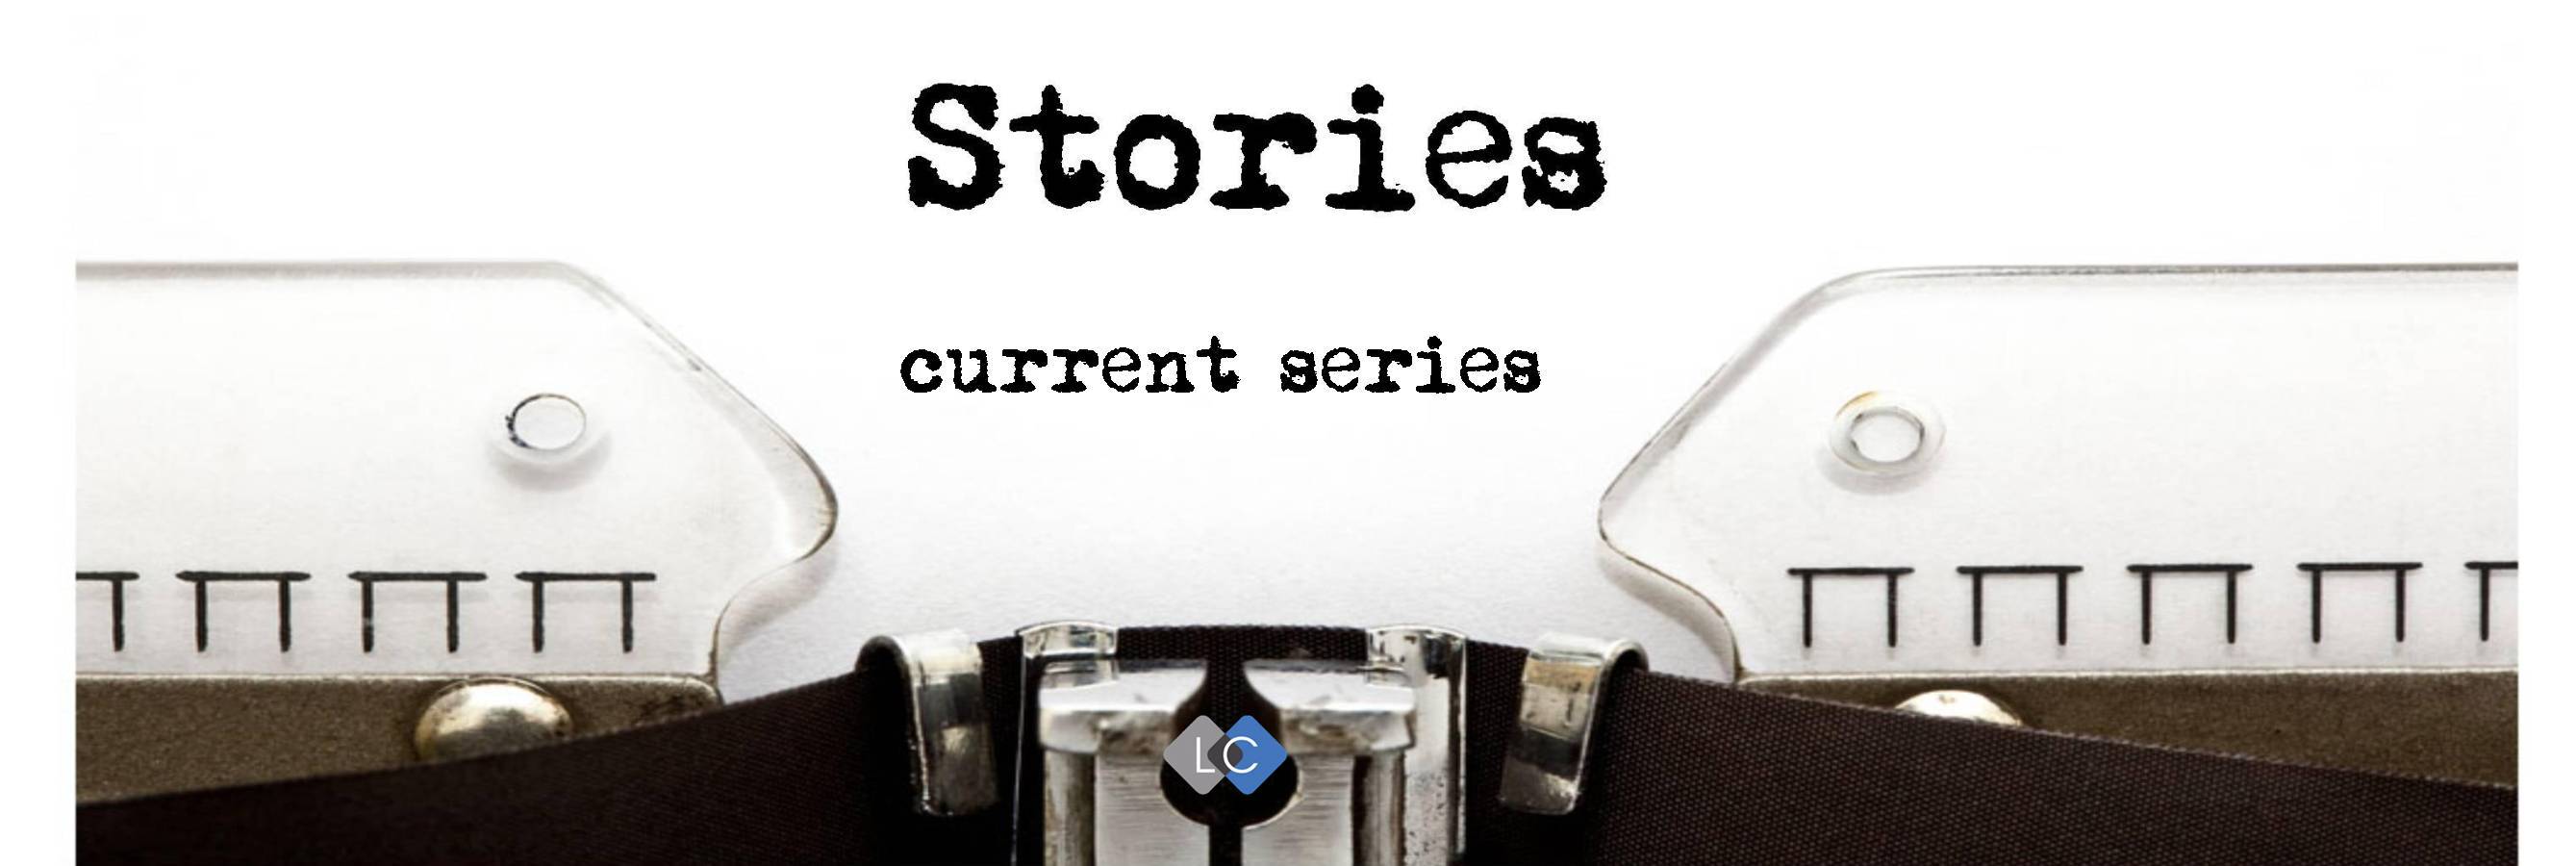 Podcast - Stories - The Neely’s (Week 3)